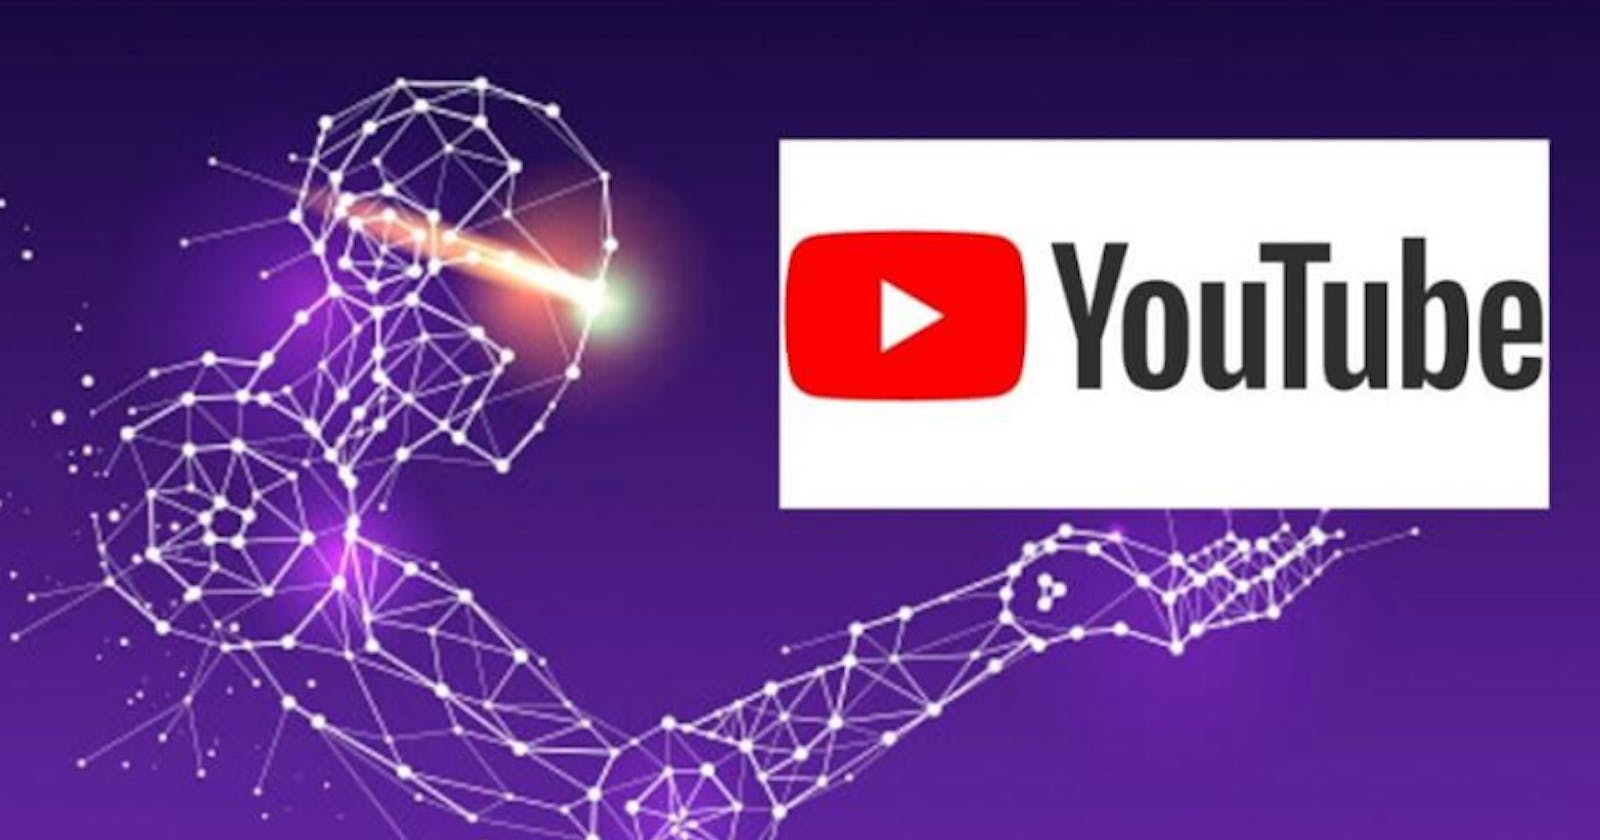 AI is coming to YouTube!